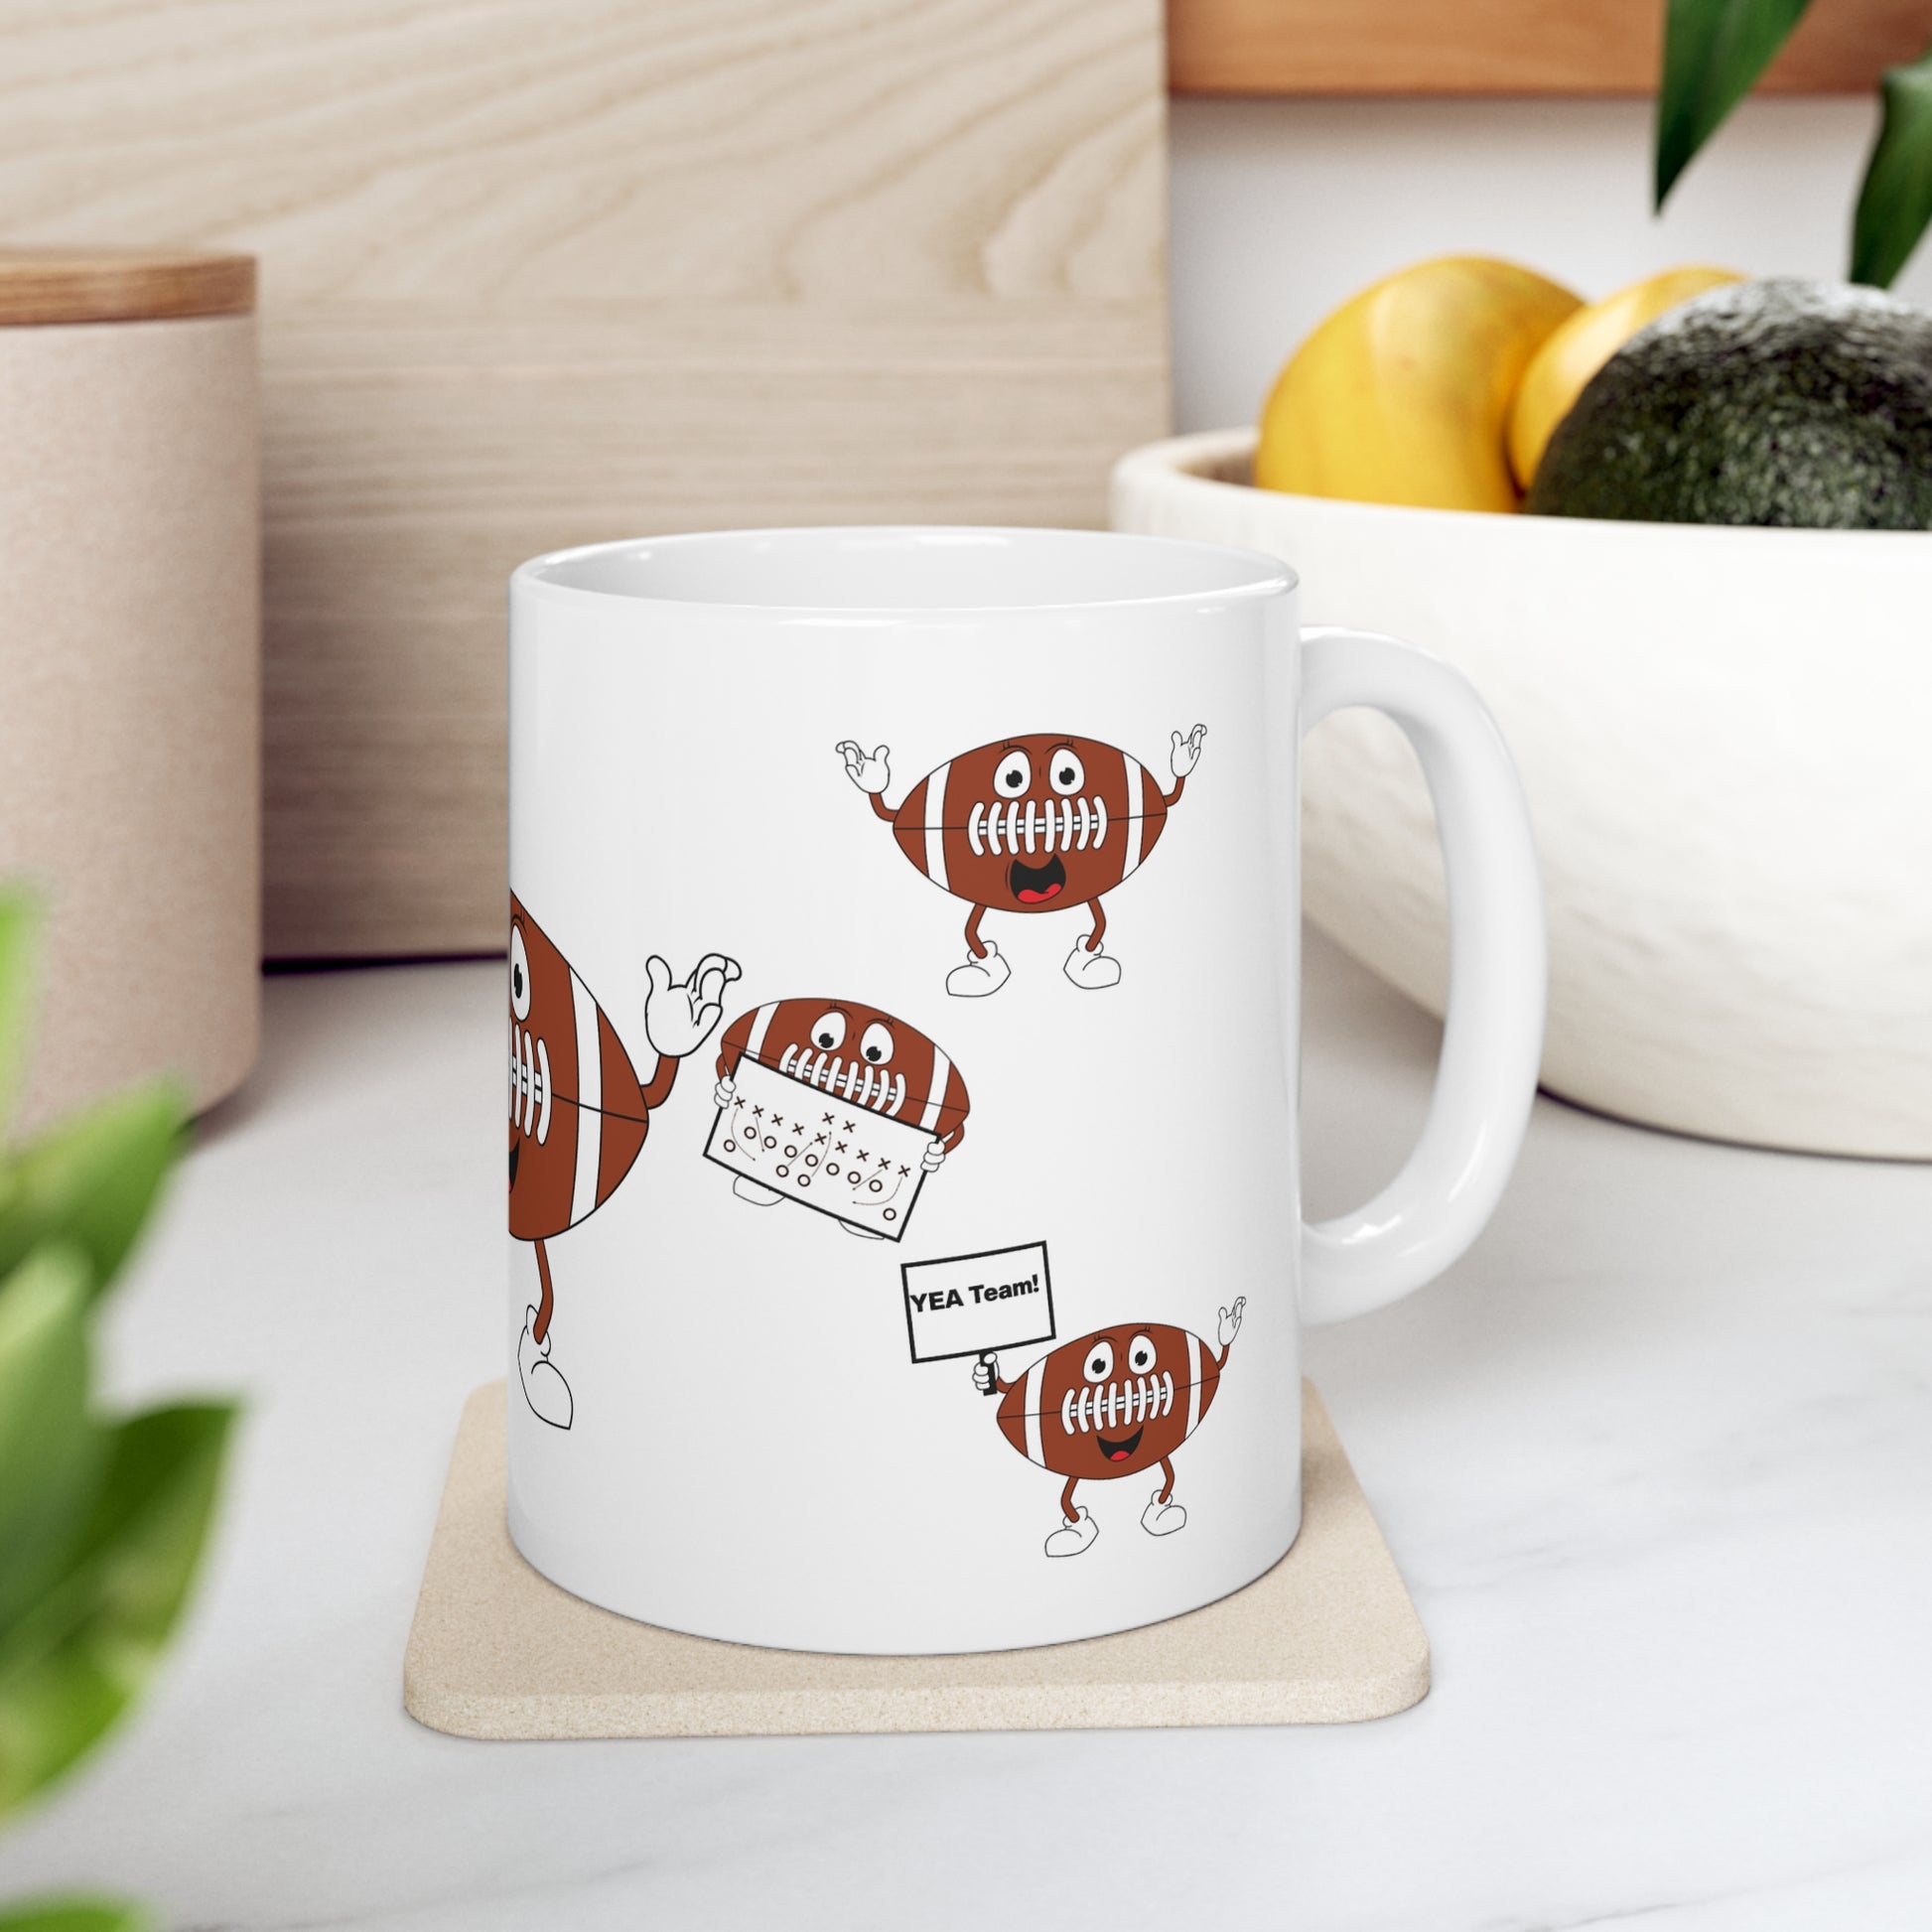 Mock up of the right side of mug as seen on a kitchen counter